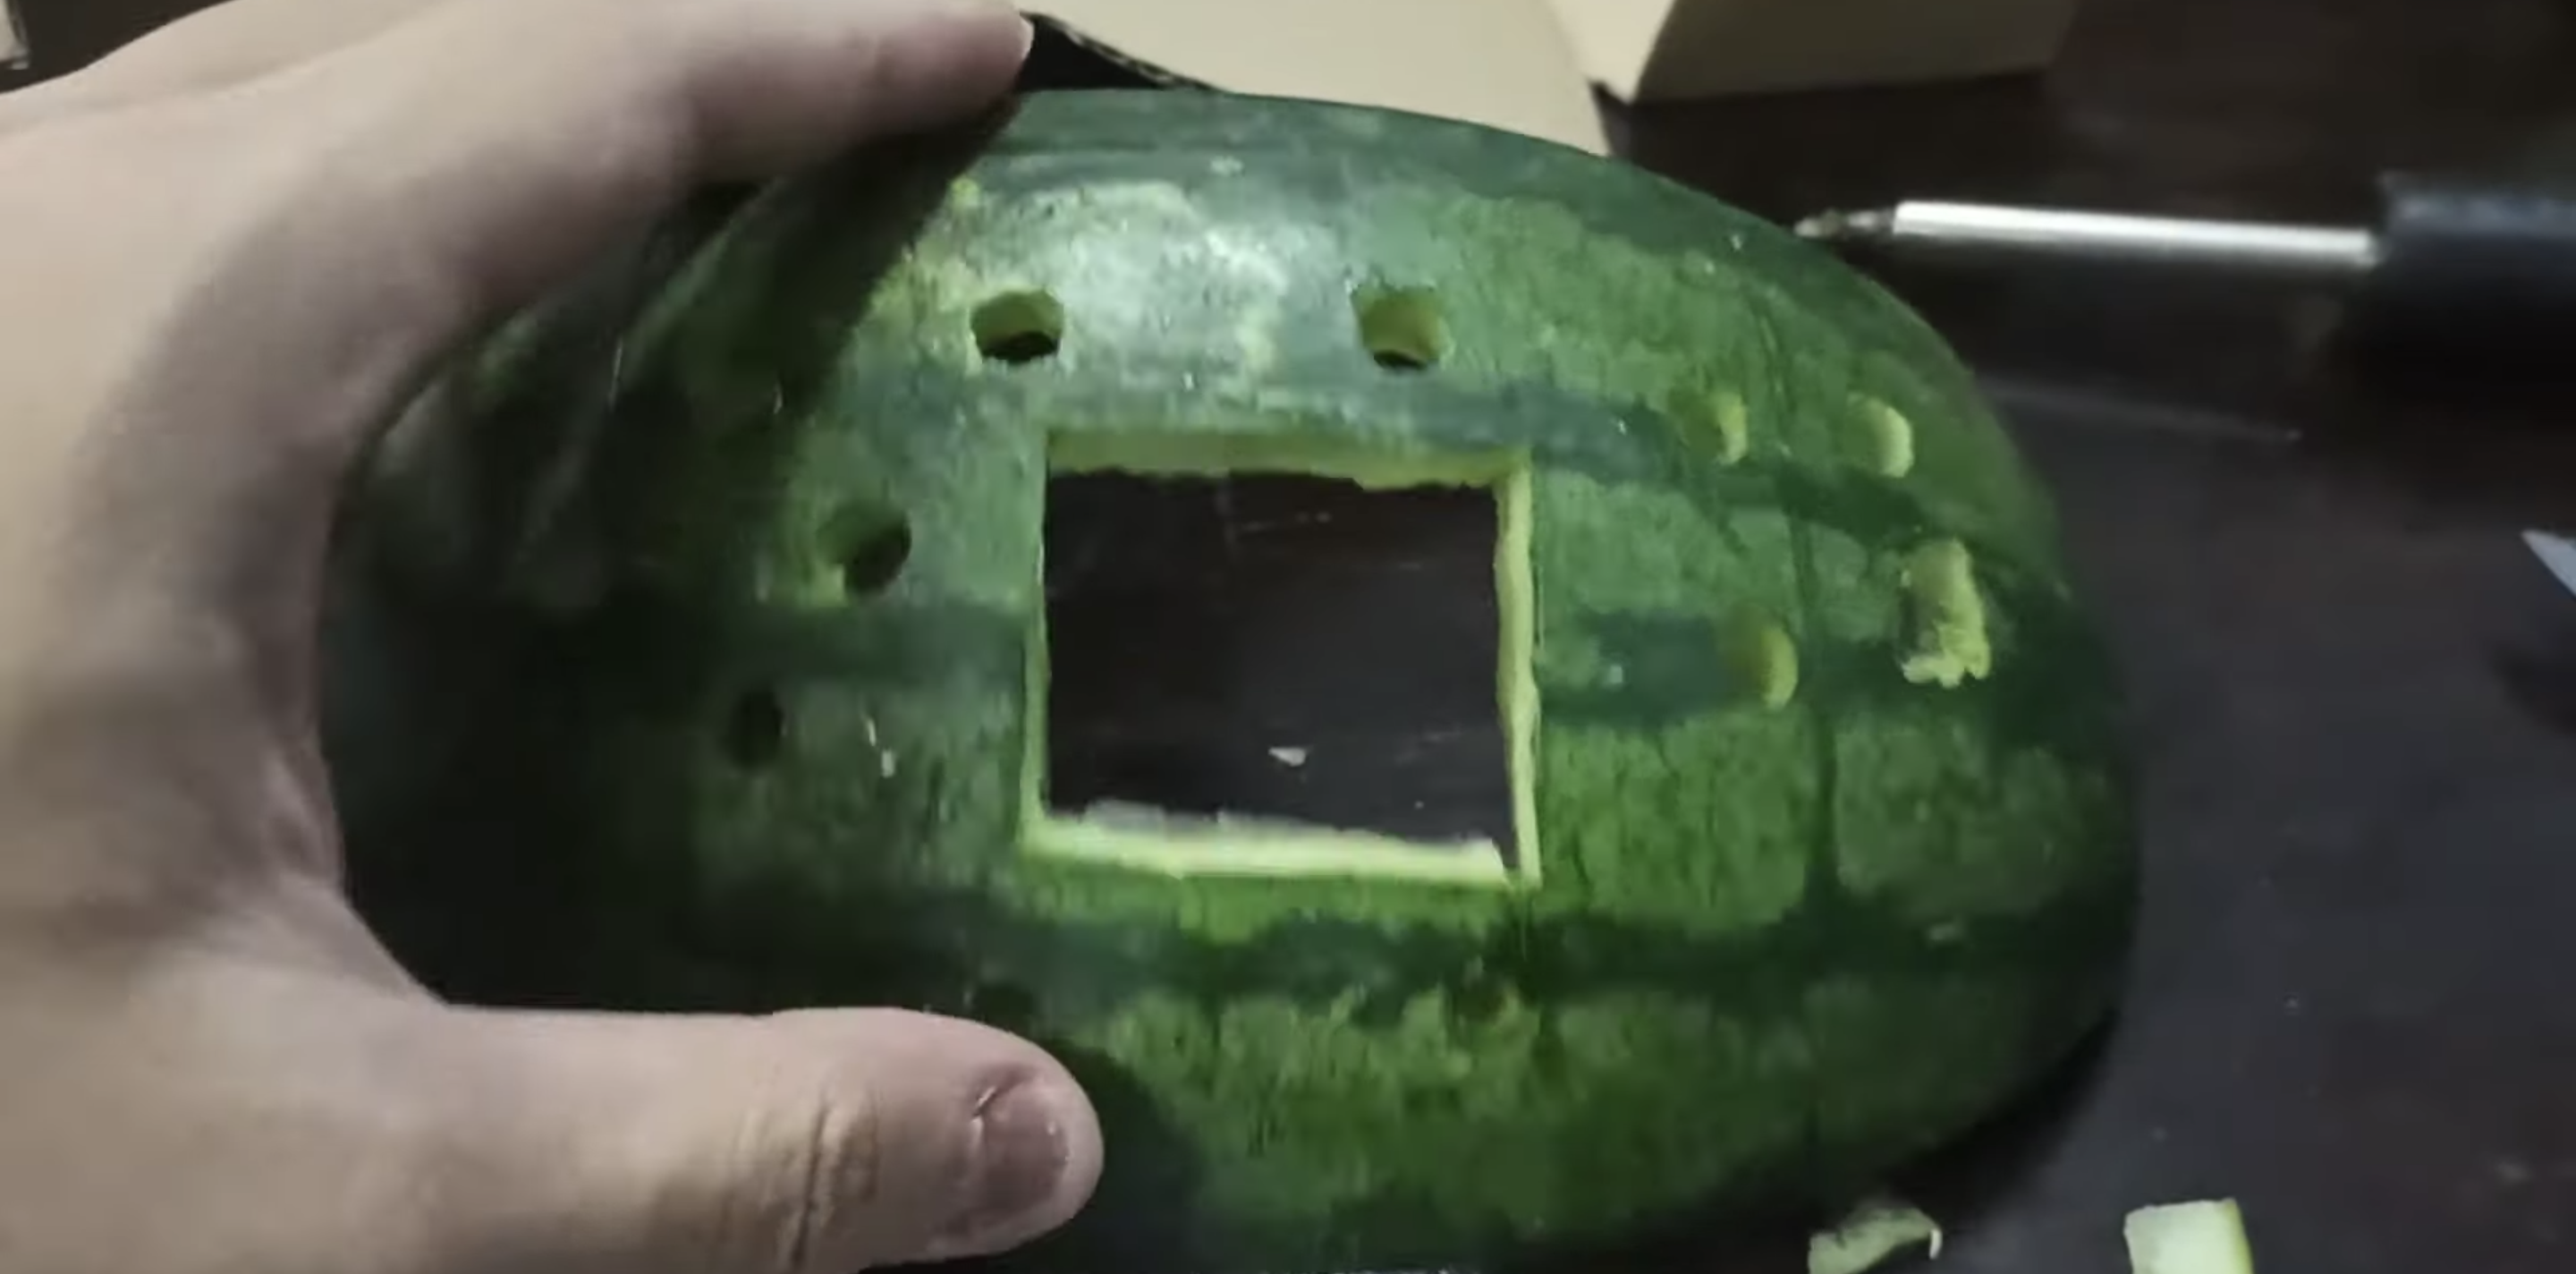 A gutted watermelon with gaps cut to fit games console buttons and a screen